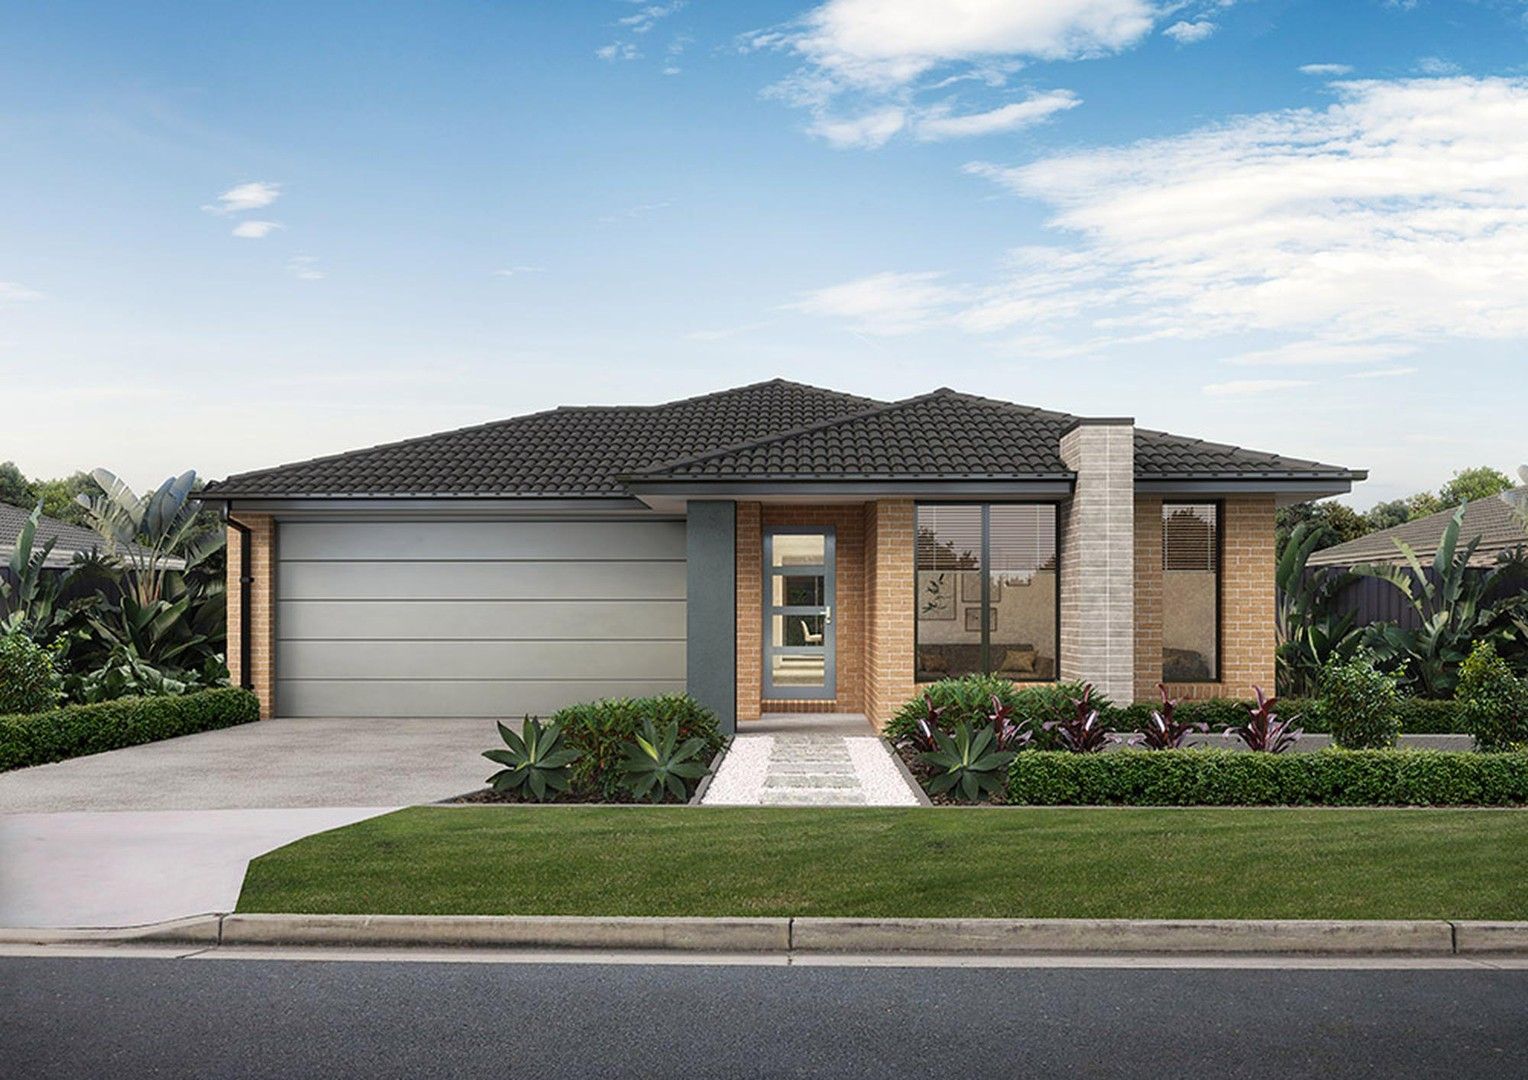 4 bedrooms New House & Land in 1228 Attwell Estate DEANSIDE VIC, 3336